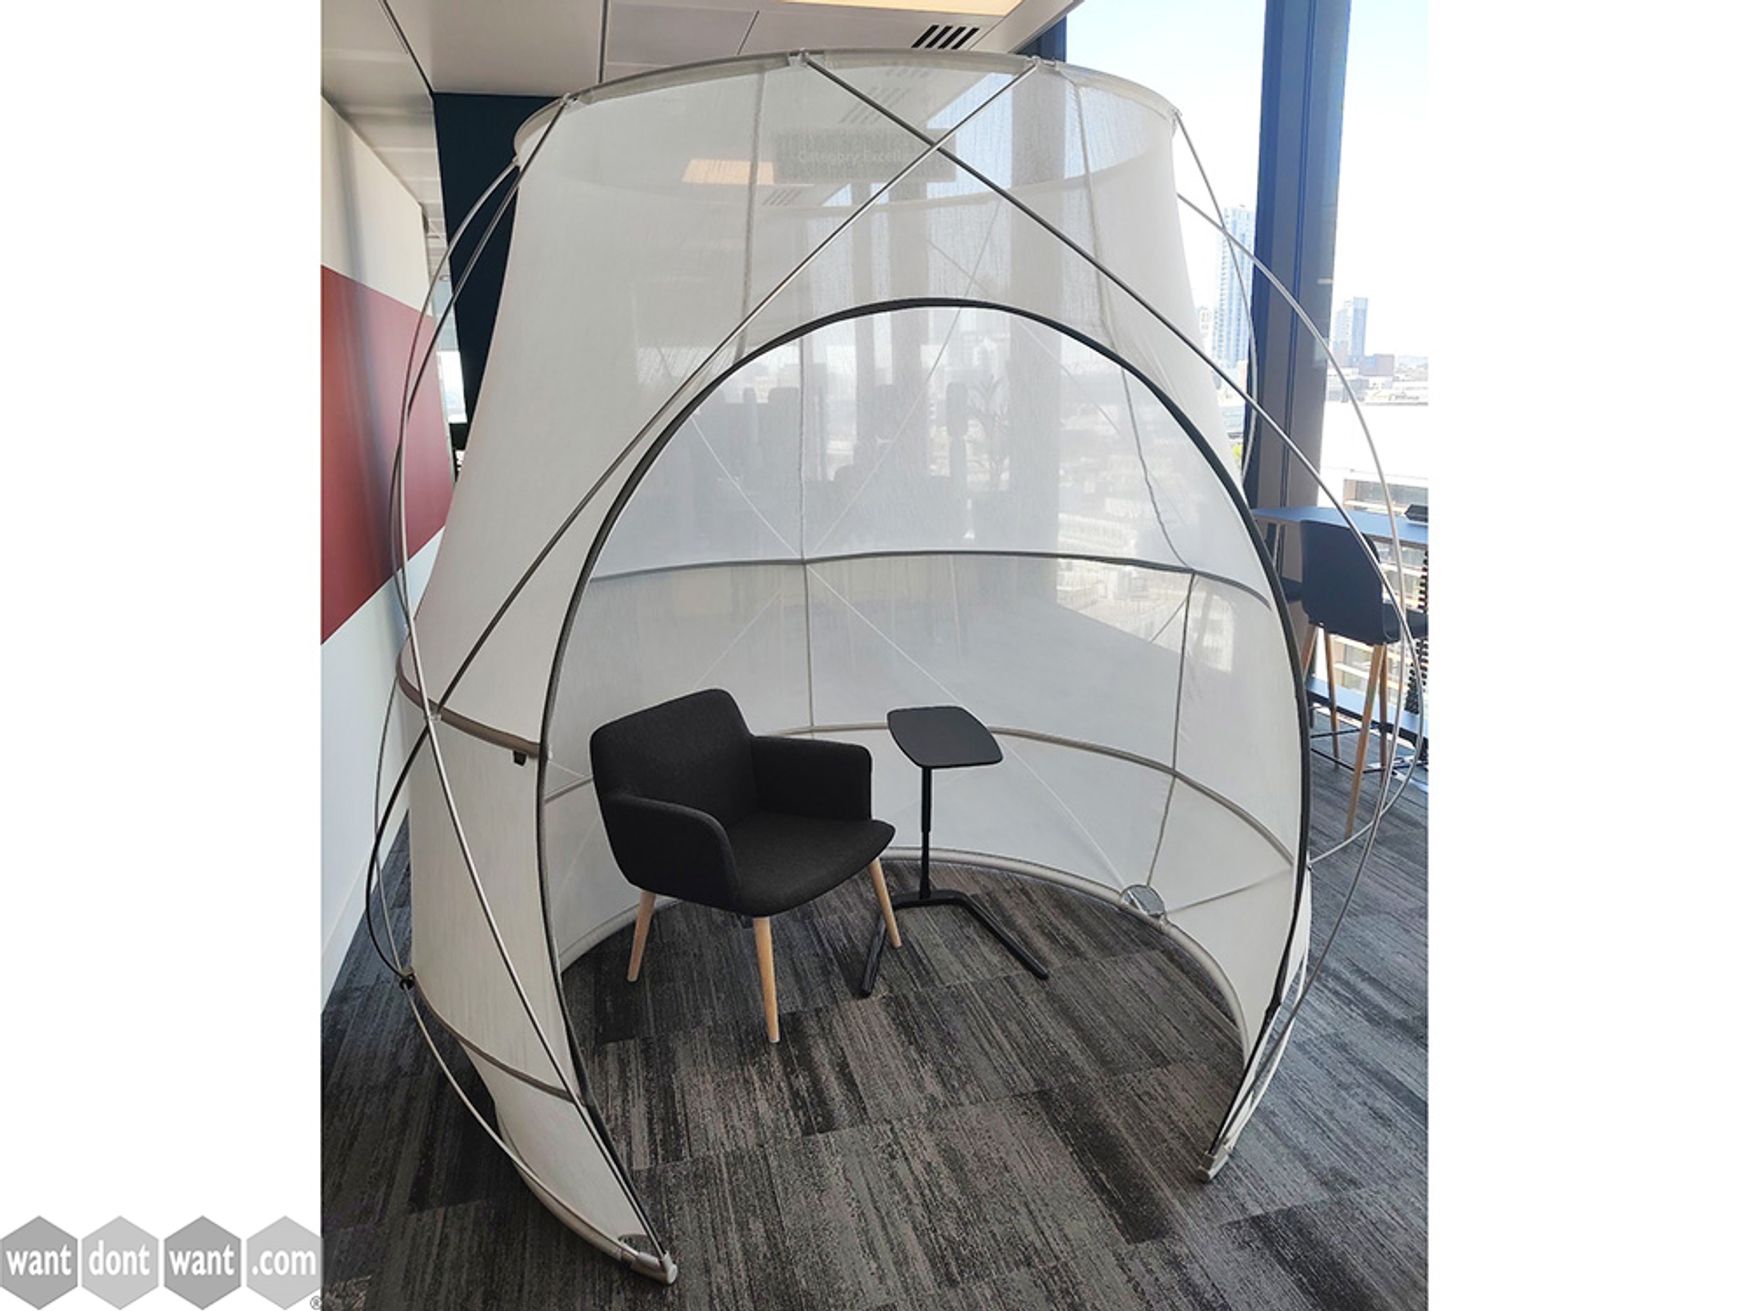 Used Steelcase Pod Tents (furniture inside not included)